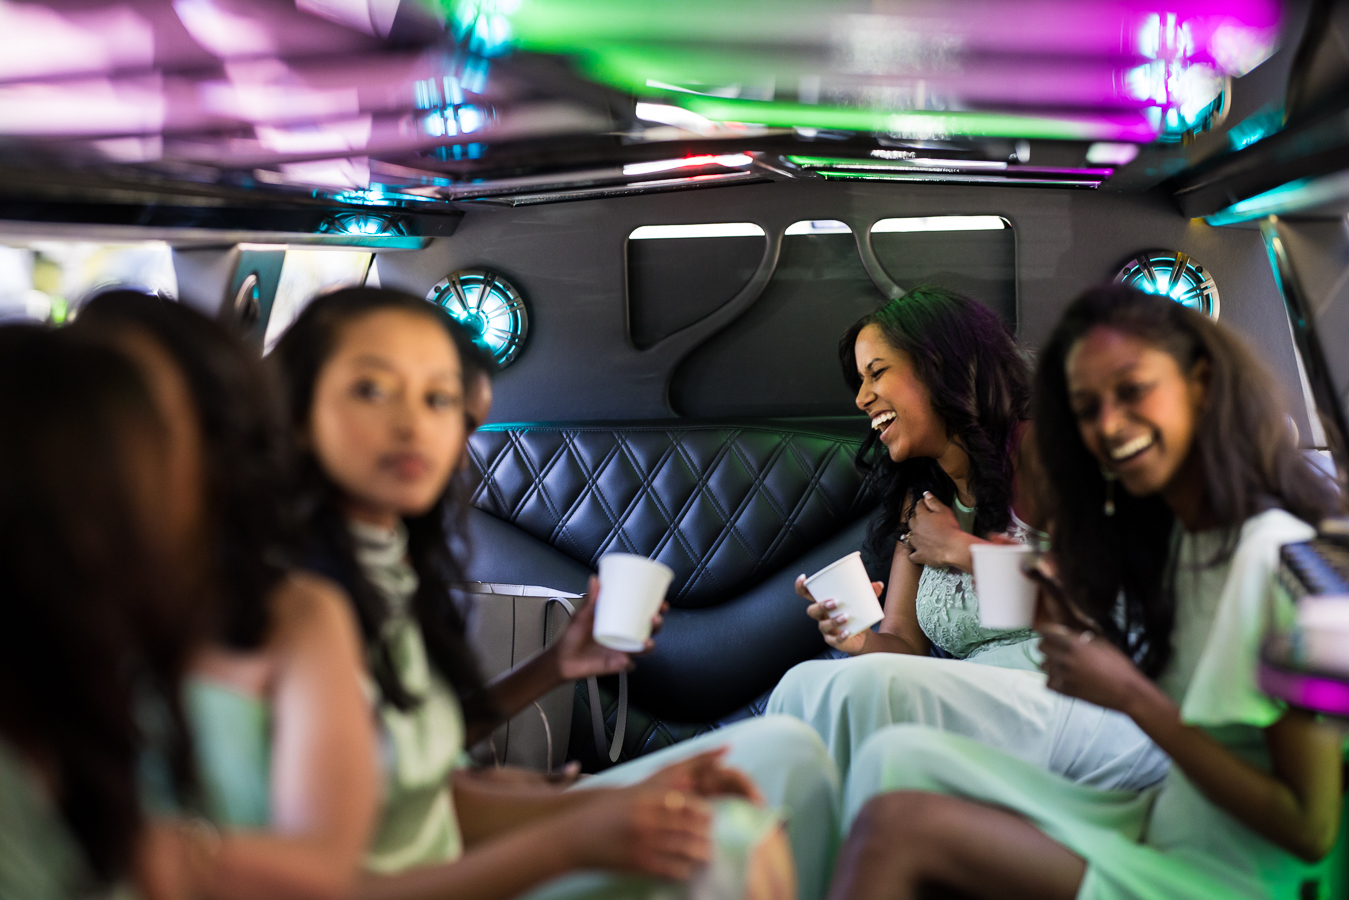 fun wedding photographer, Lisa Rhinehart, captures this vibrant fun image of the bridesmaids as they ride in the limo through downtown dc as they head to st Francis hall for the wedding ceremony 